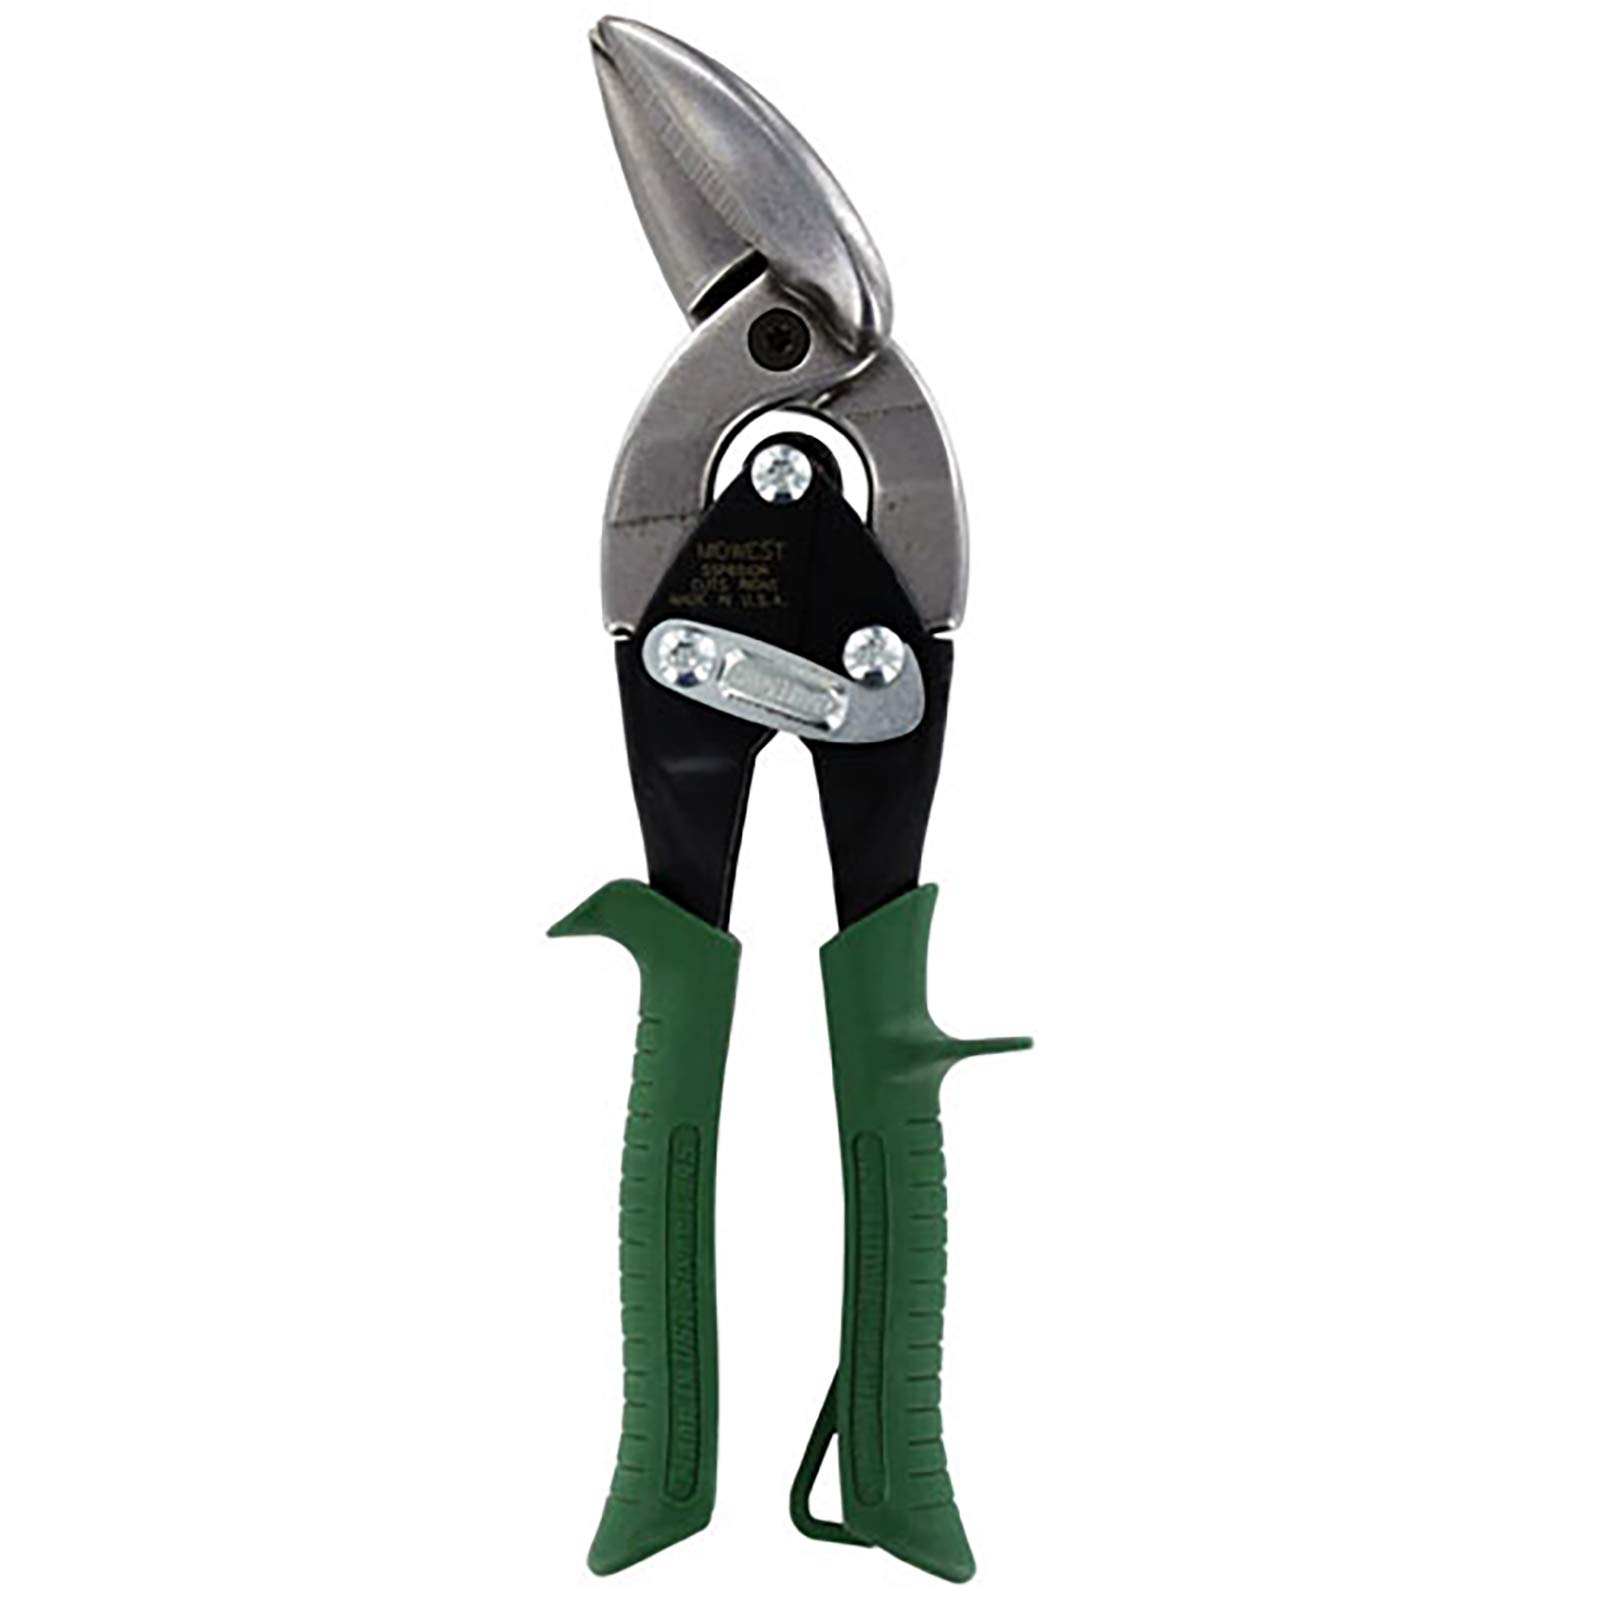 MIDWEST Aviation Snip - Right Cut Offset Stainless Steel Cutting Shears with Forged Blade KUSHN-POWER Comfort Grips - MWT-